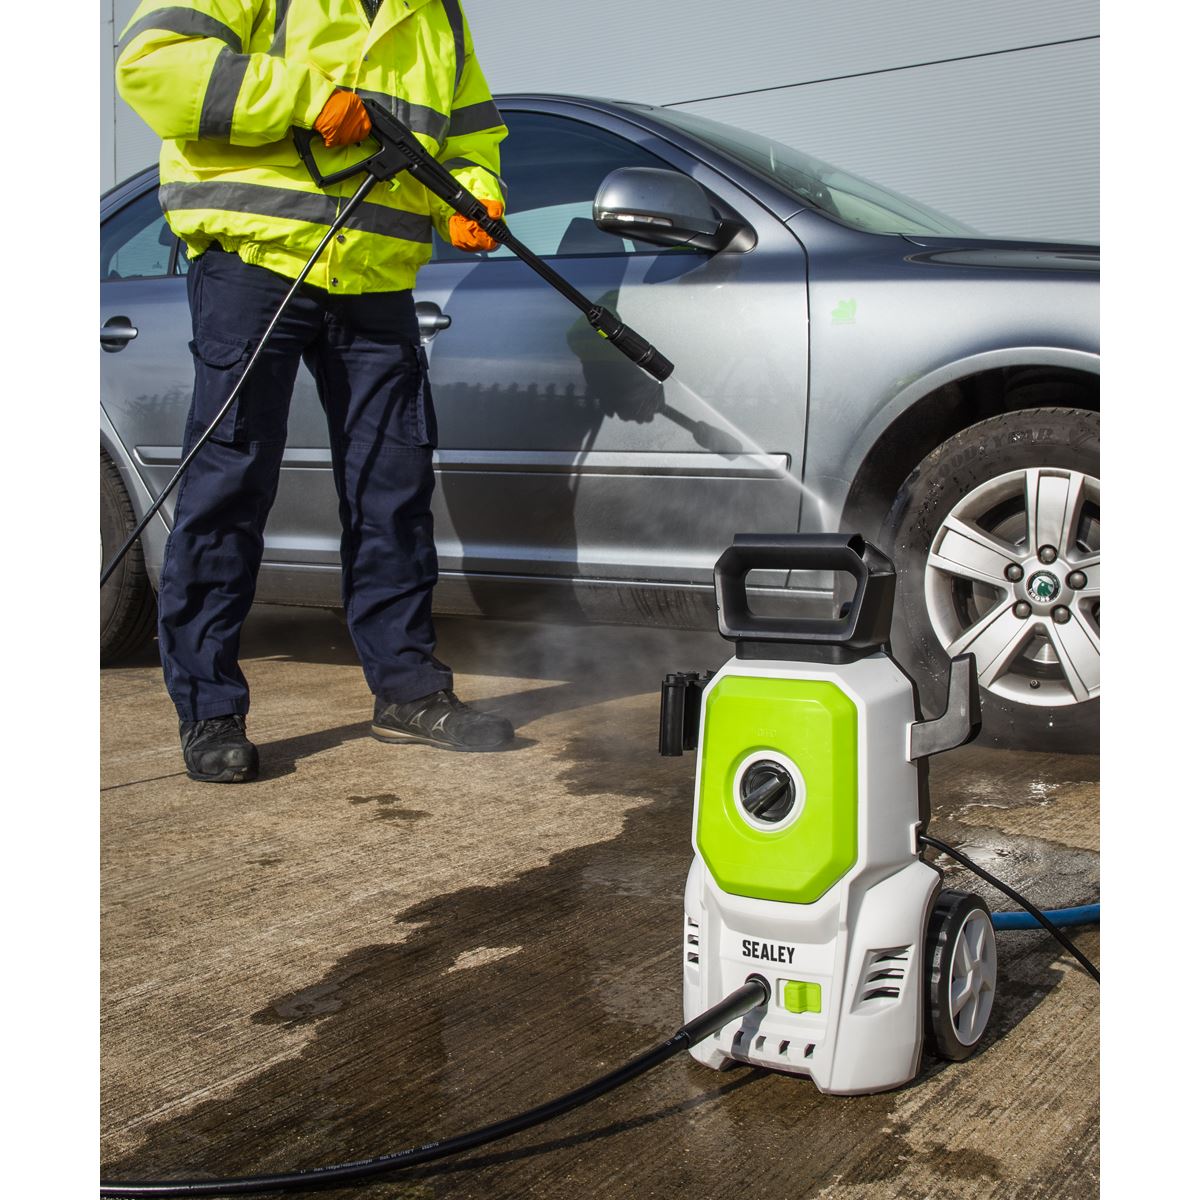 Sealey Pressure Washer 100bar 390L/hr with Snow Foam PW1610COMBO